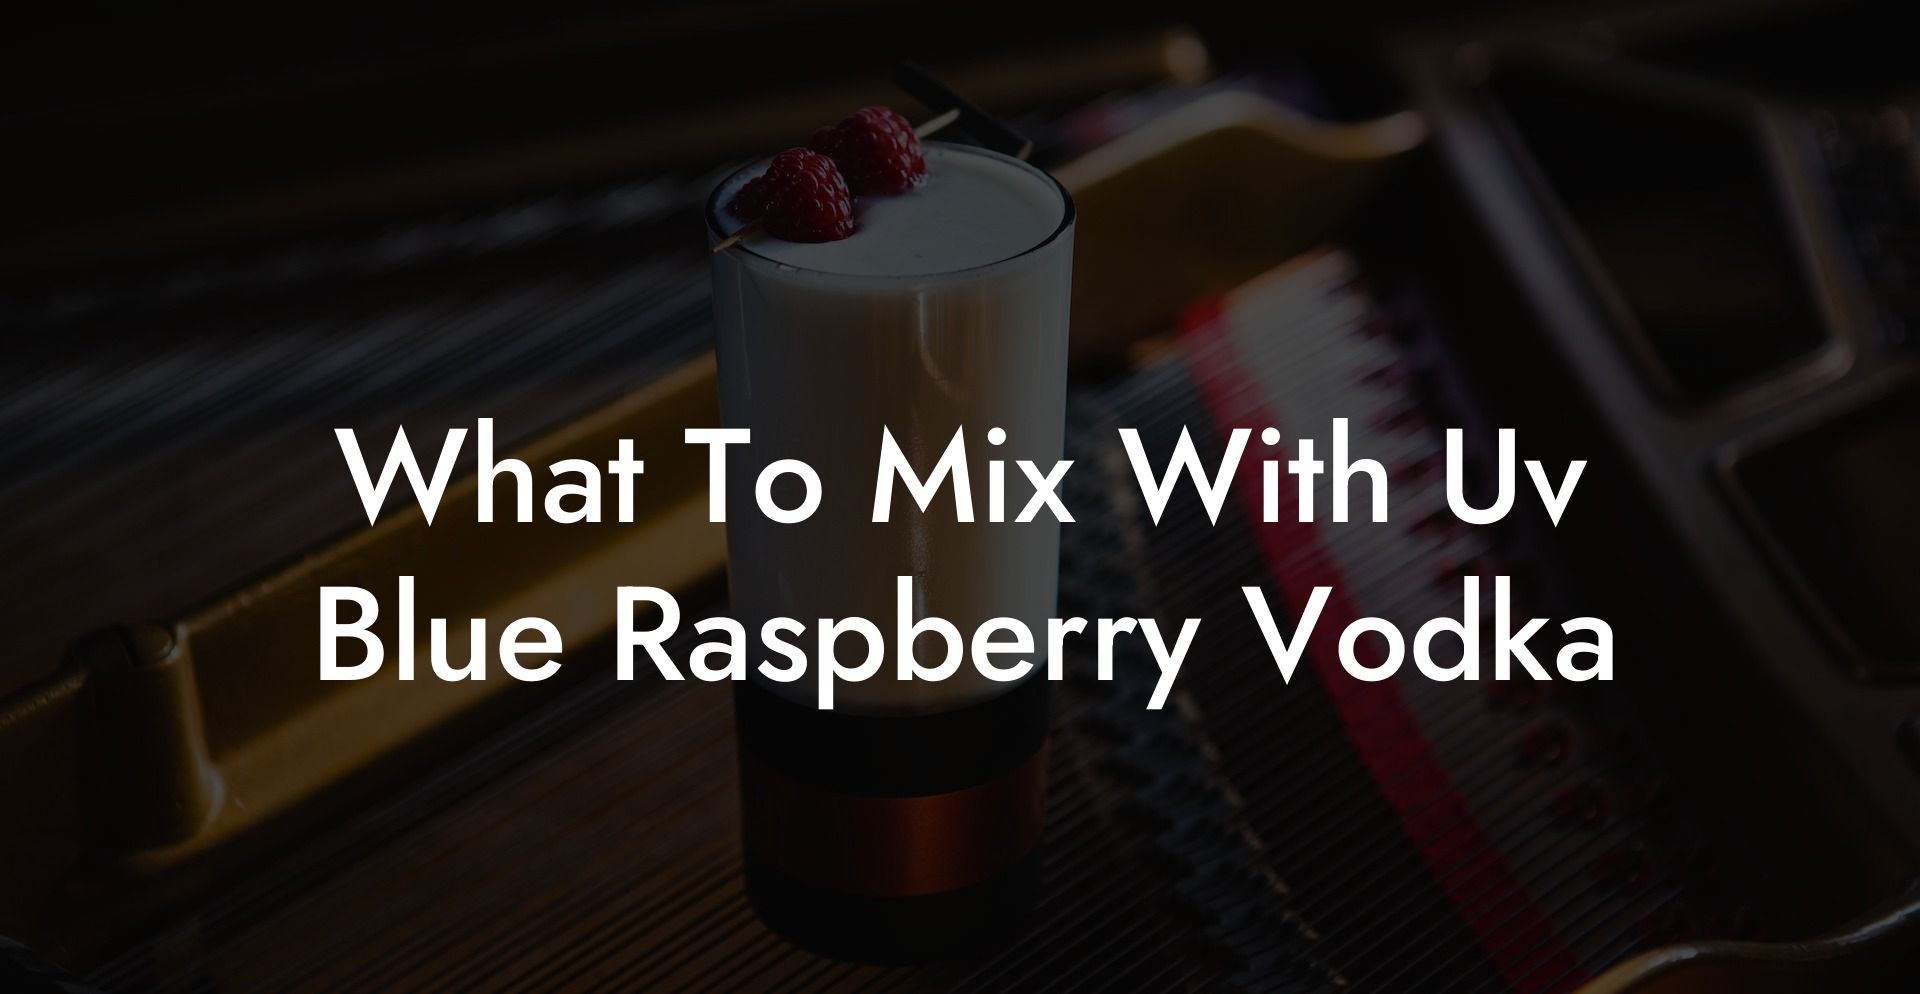 What To Mix With Uv Blue Raspberry Vodka